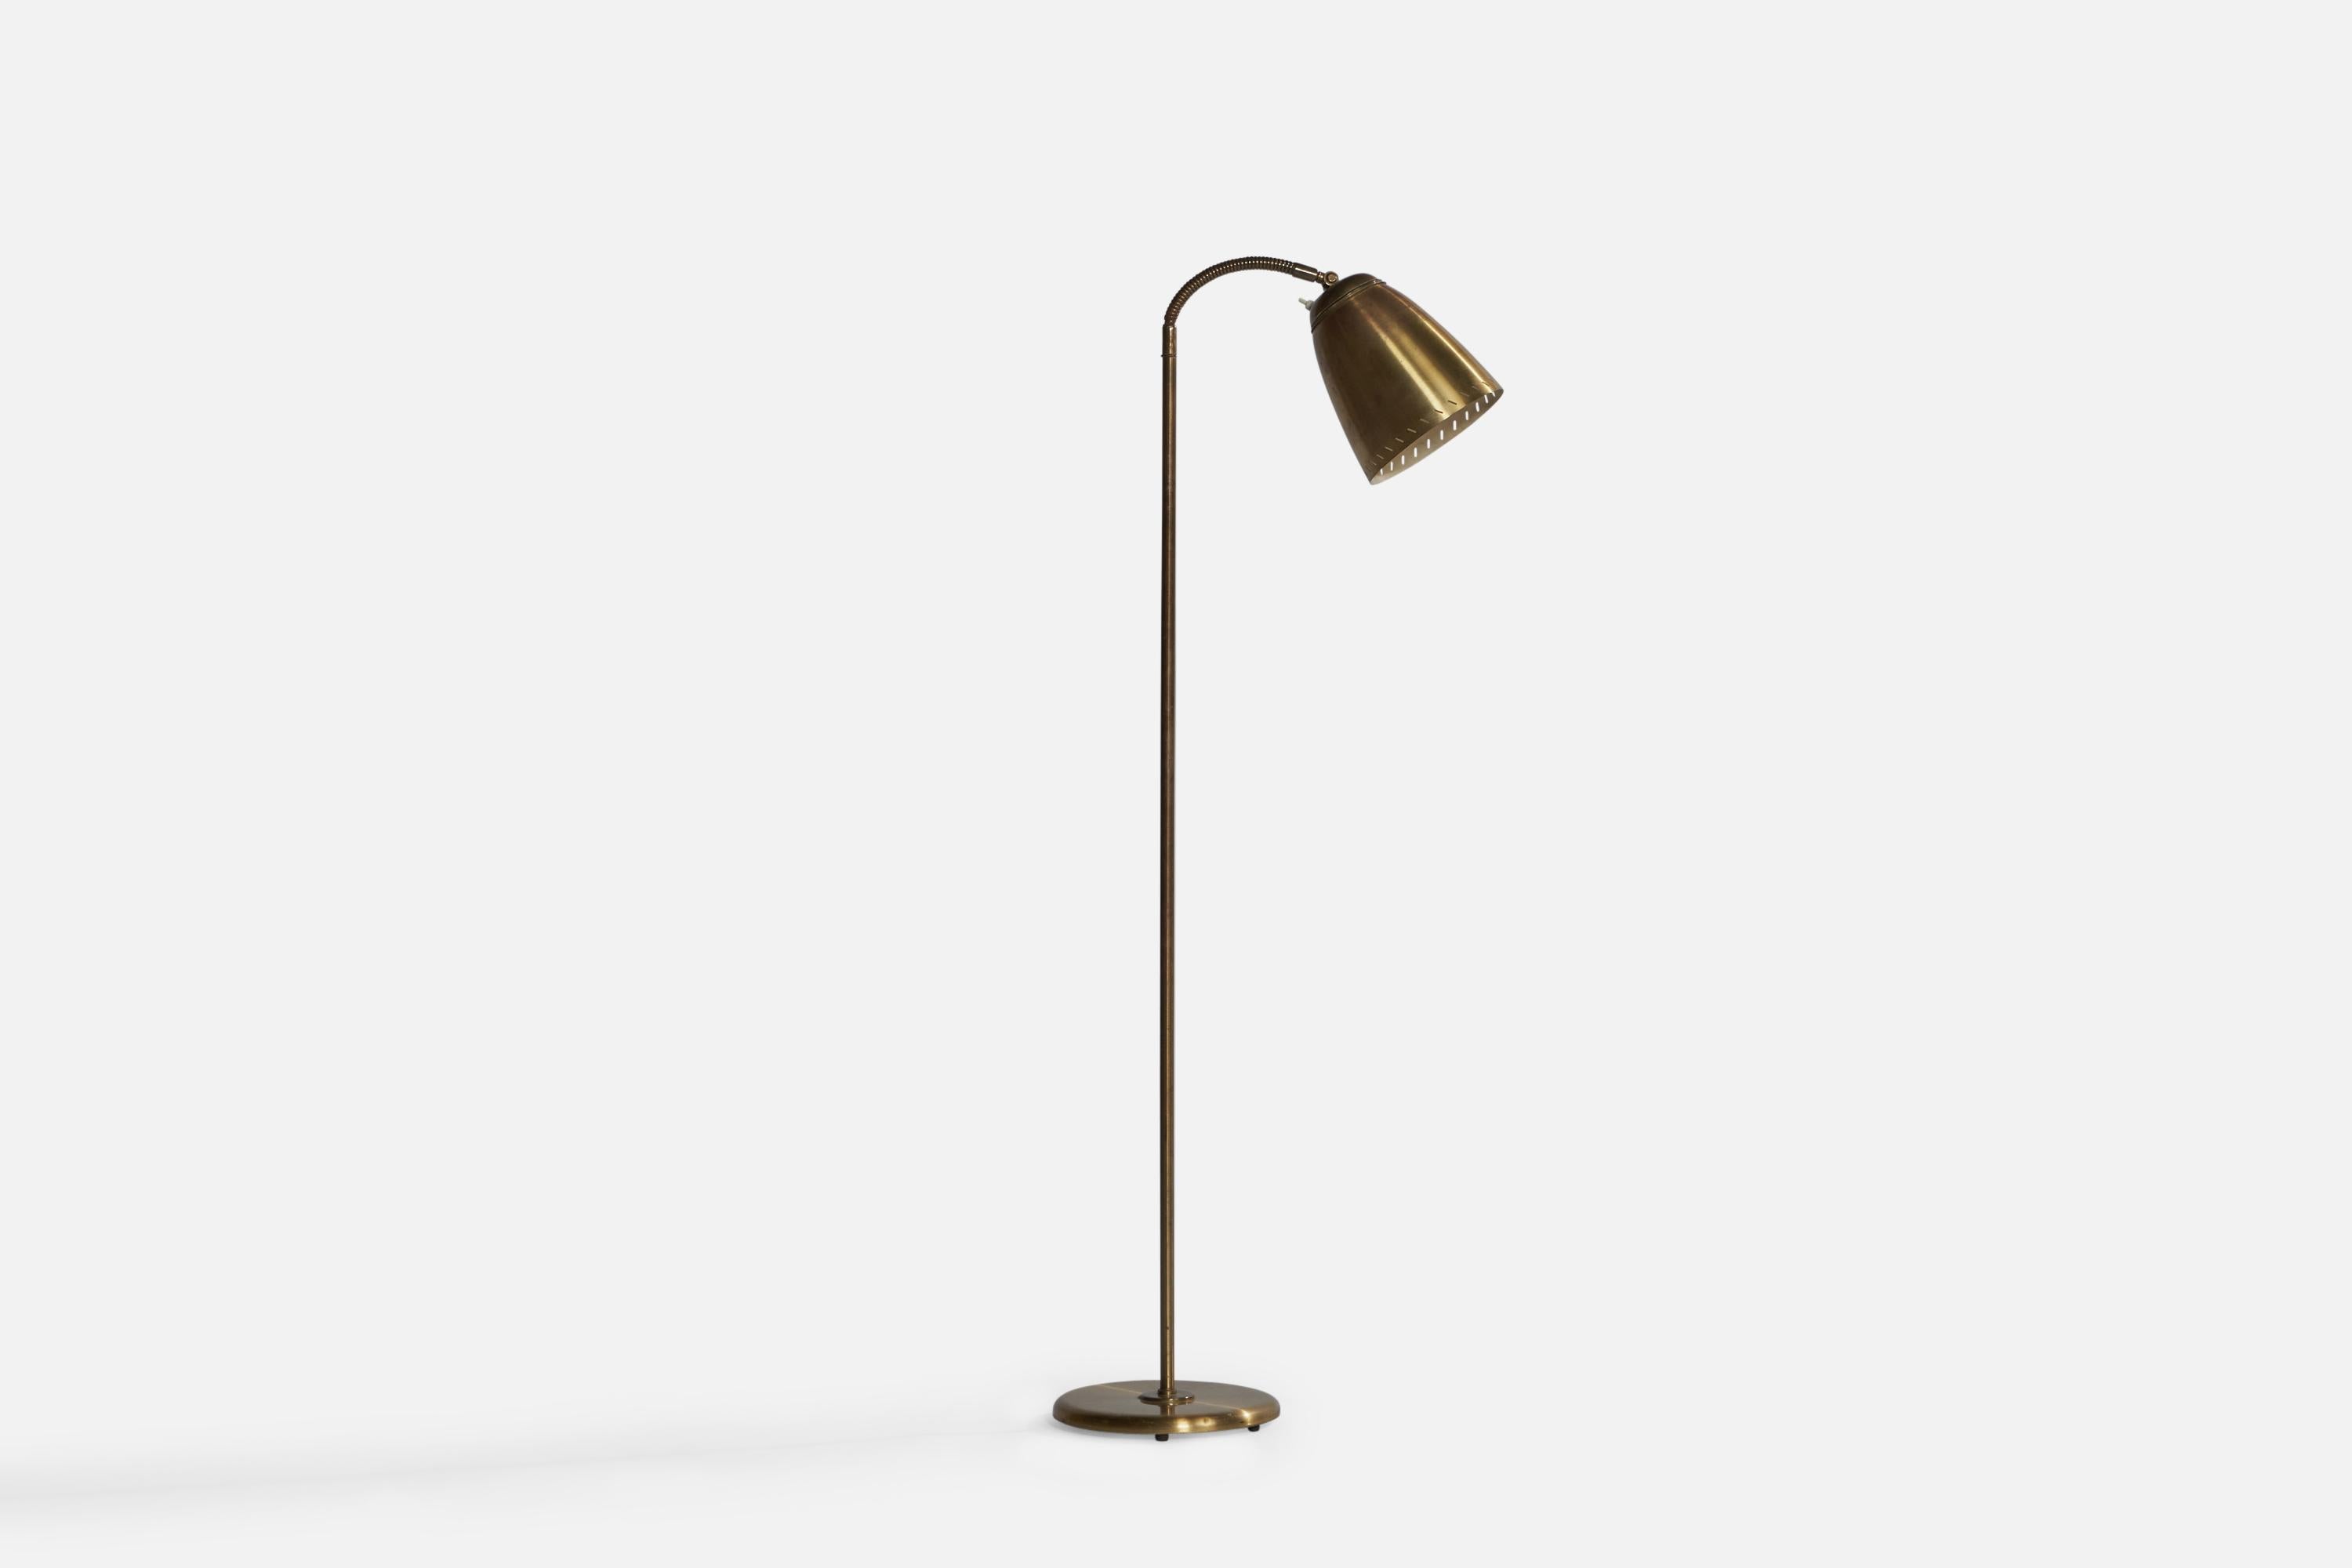 An adjustable brass floor lamp designed and produced in Sweden, c. 1940s.

Overall Dimensions (inches): 50.45” H x 10.25” W x 20.5” D
Dimensions vary based on position of light.
Bulb Specifications: E-26 Bulb
Number of Sockets: 1
All lighting will